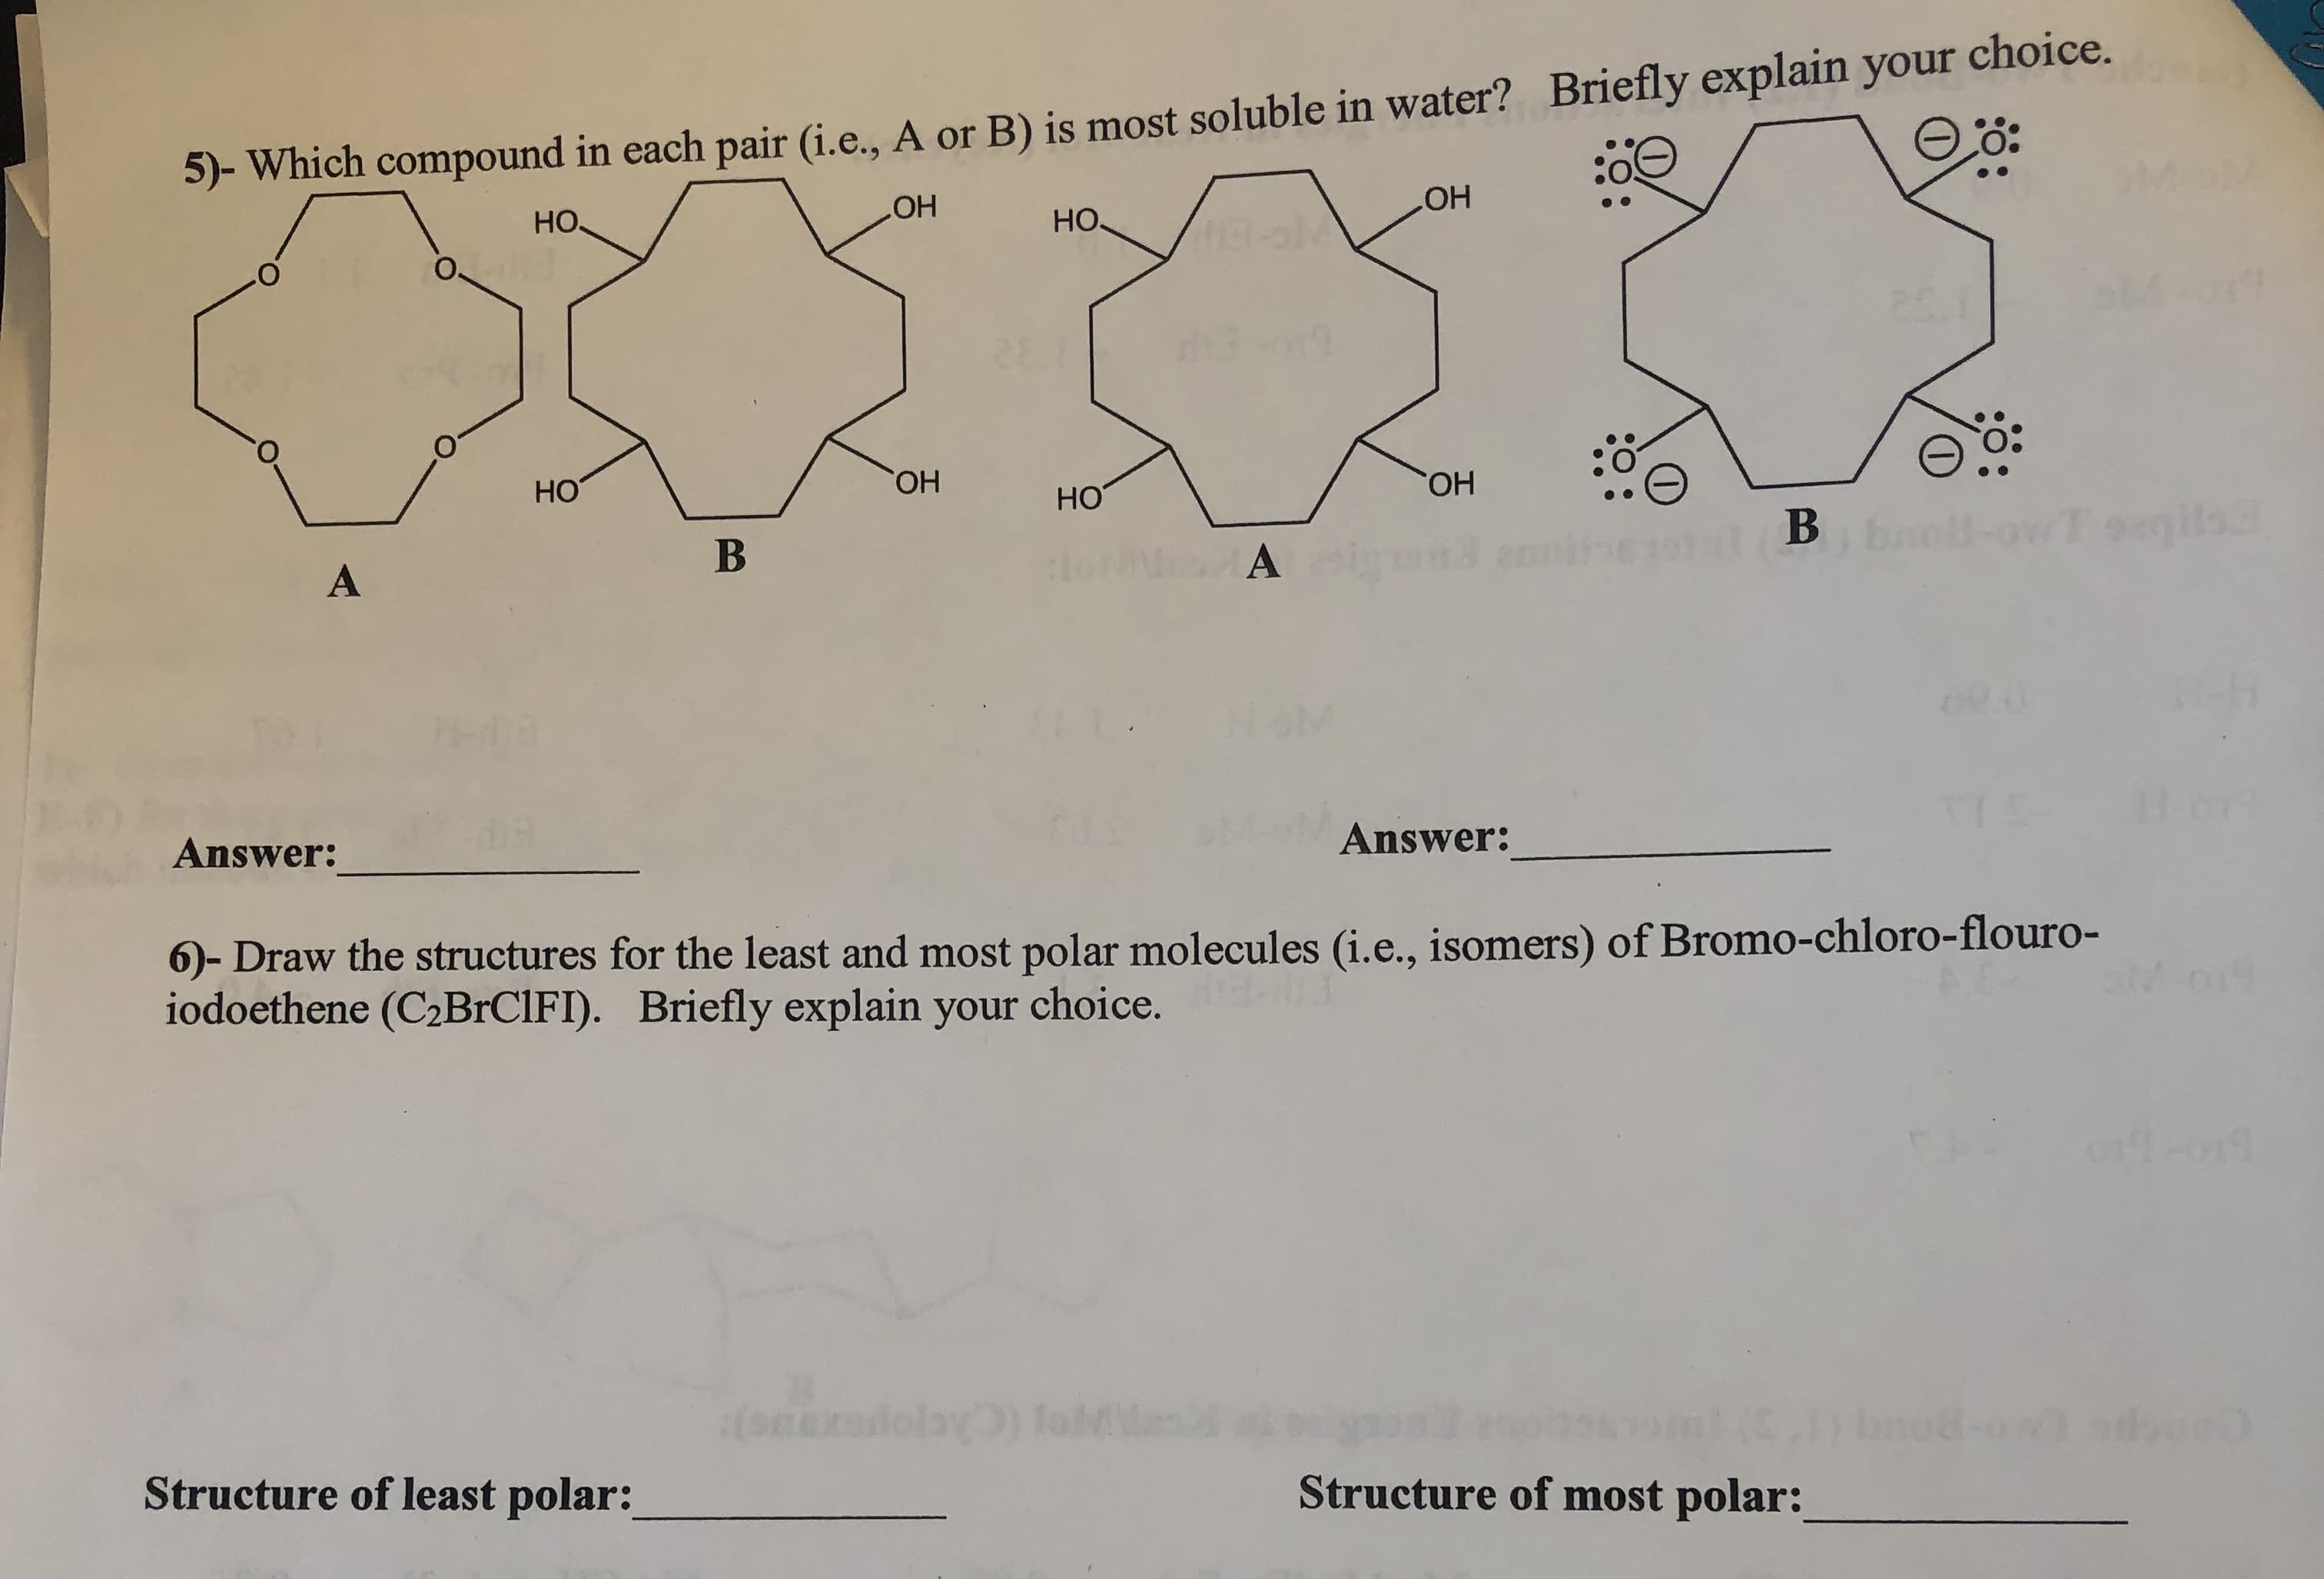 (i.e., A or B) is most soluble in water? Briefly explain your choice.
5- Which compound in each pair
.O
он
HO
OH
HO
O.
: O
но
OH
но
он
Answer
Answer:
)- Draw the structures for the least and most polar molecules (i.e., isomers) of Bromo-chloro-flouro-
iodoethene (C2BrCIFI). Briefly explain your choice.
Structure of least polar:
Structure of most polar:
